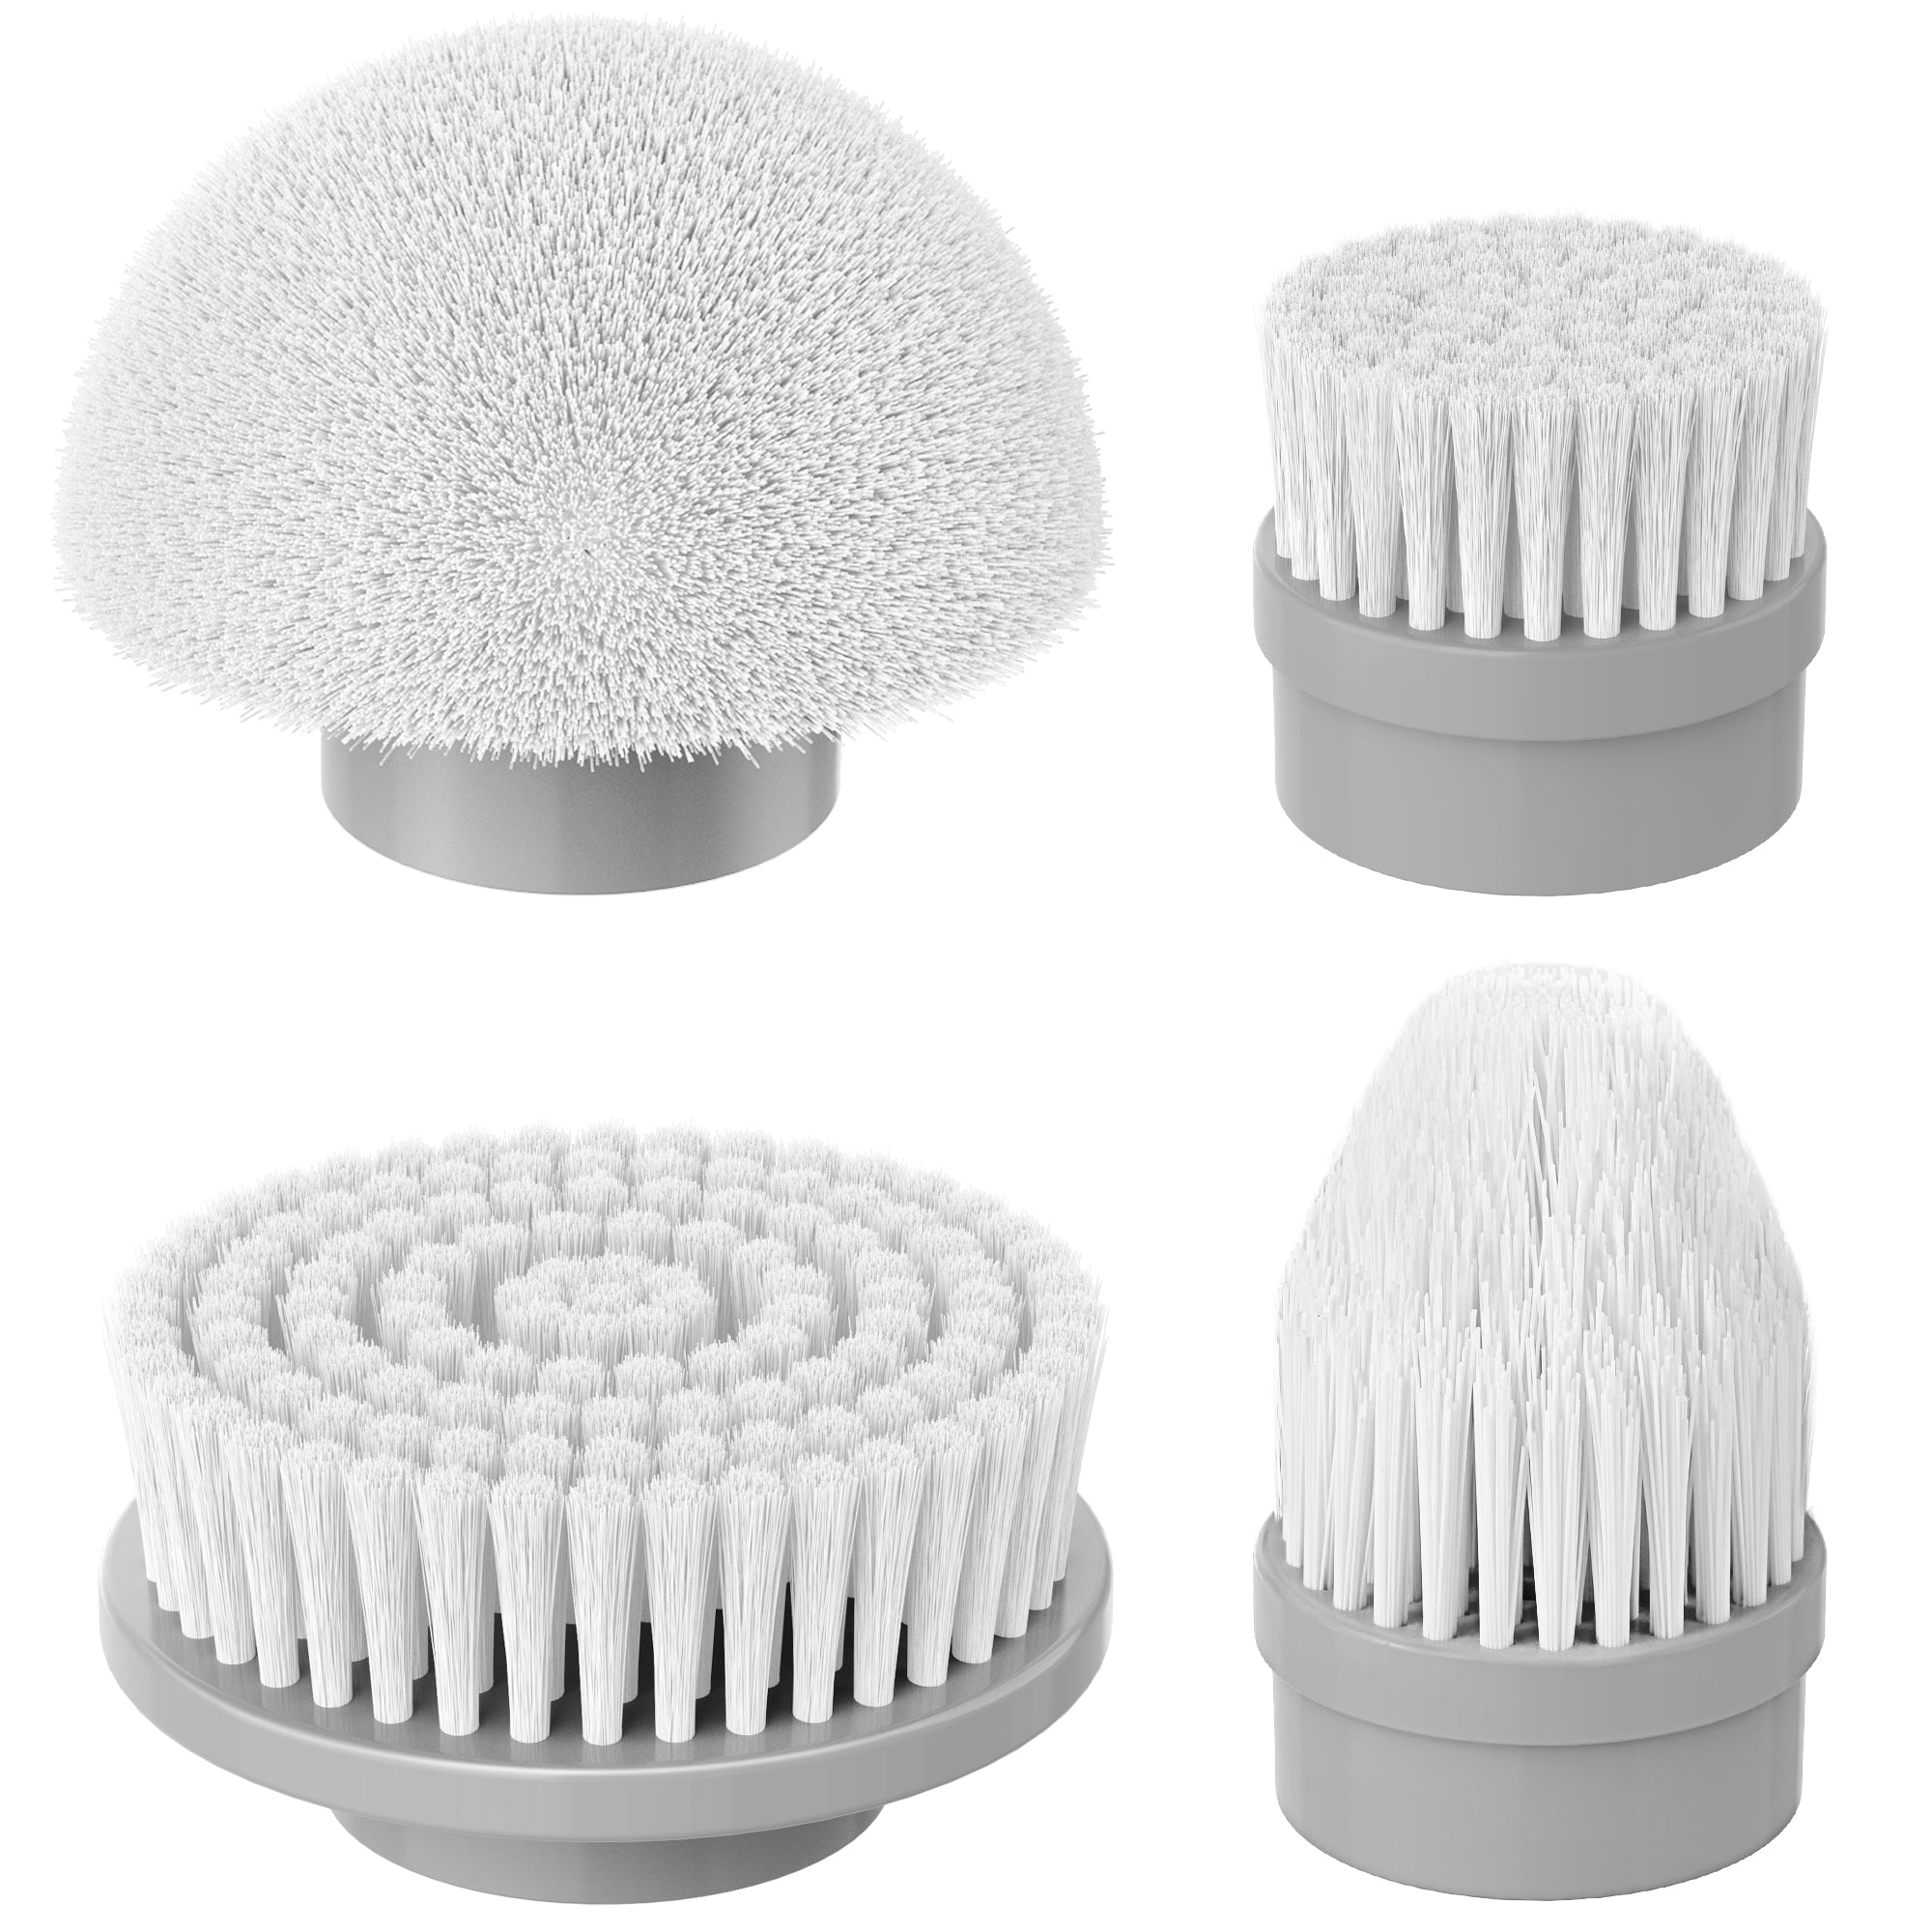 Electric Spin Scrubber, Voweek Cordless Power Scrubber with 4 Replaceable Brush Heads Adjustable Extension Handle, Electric Cleaning Brush for